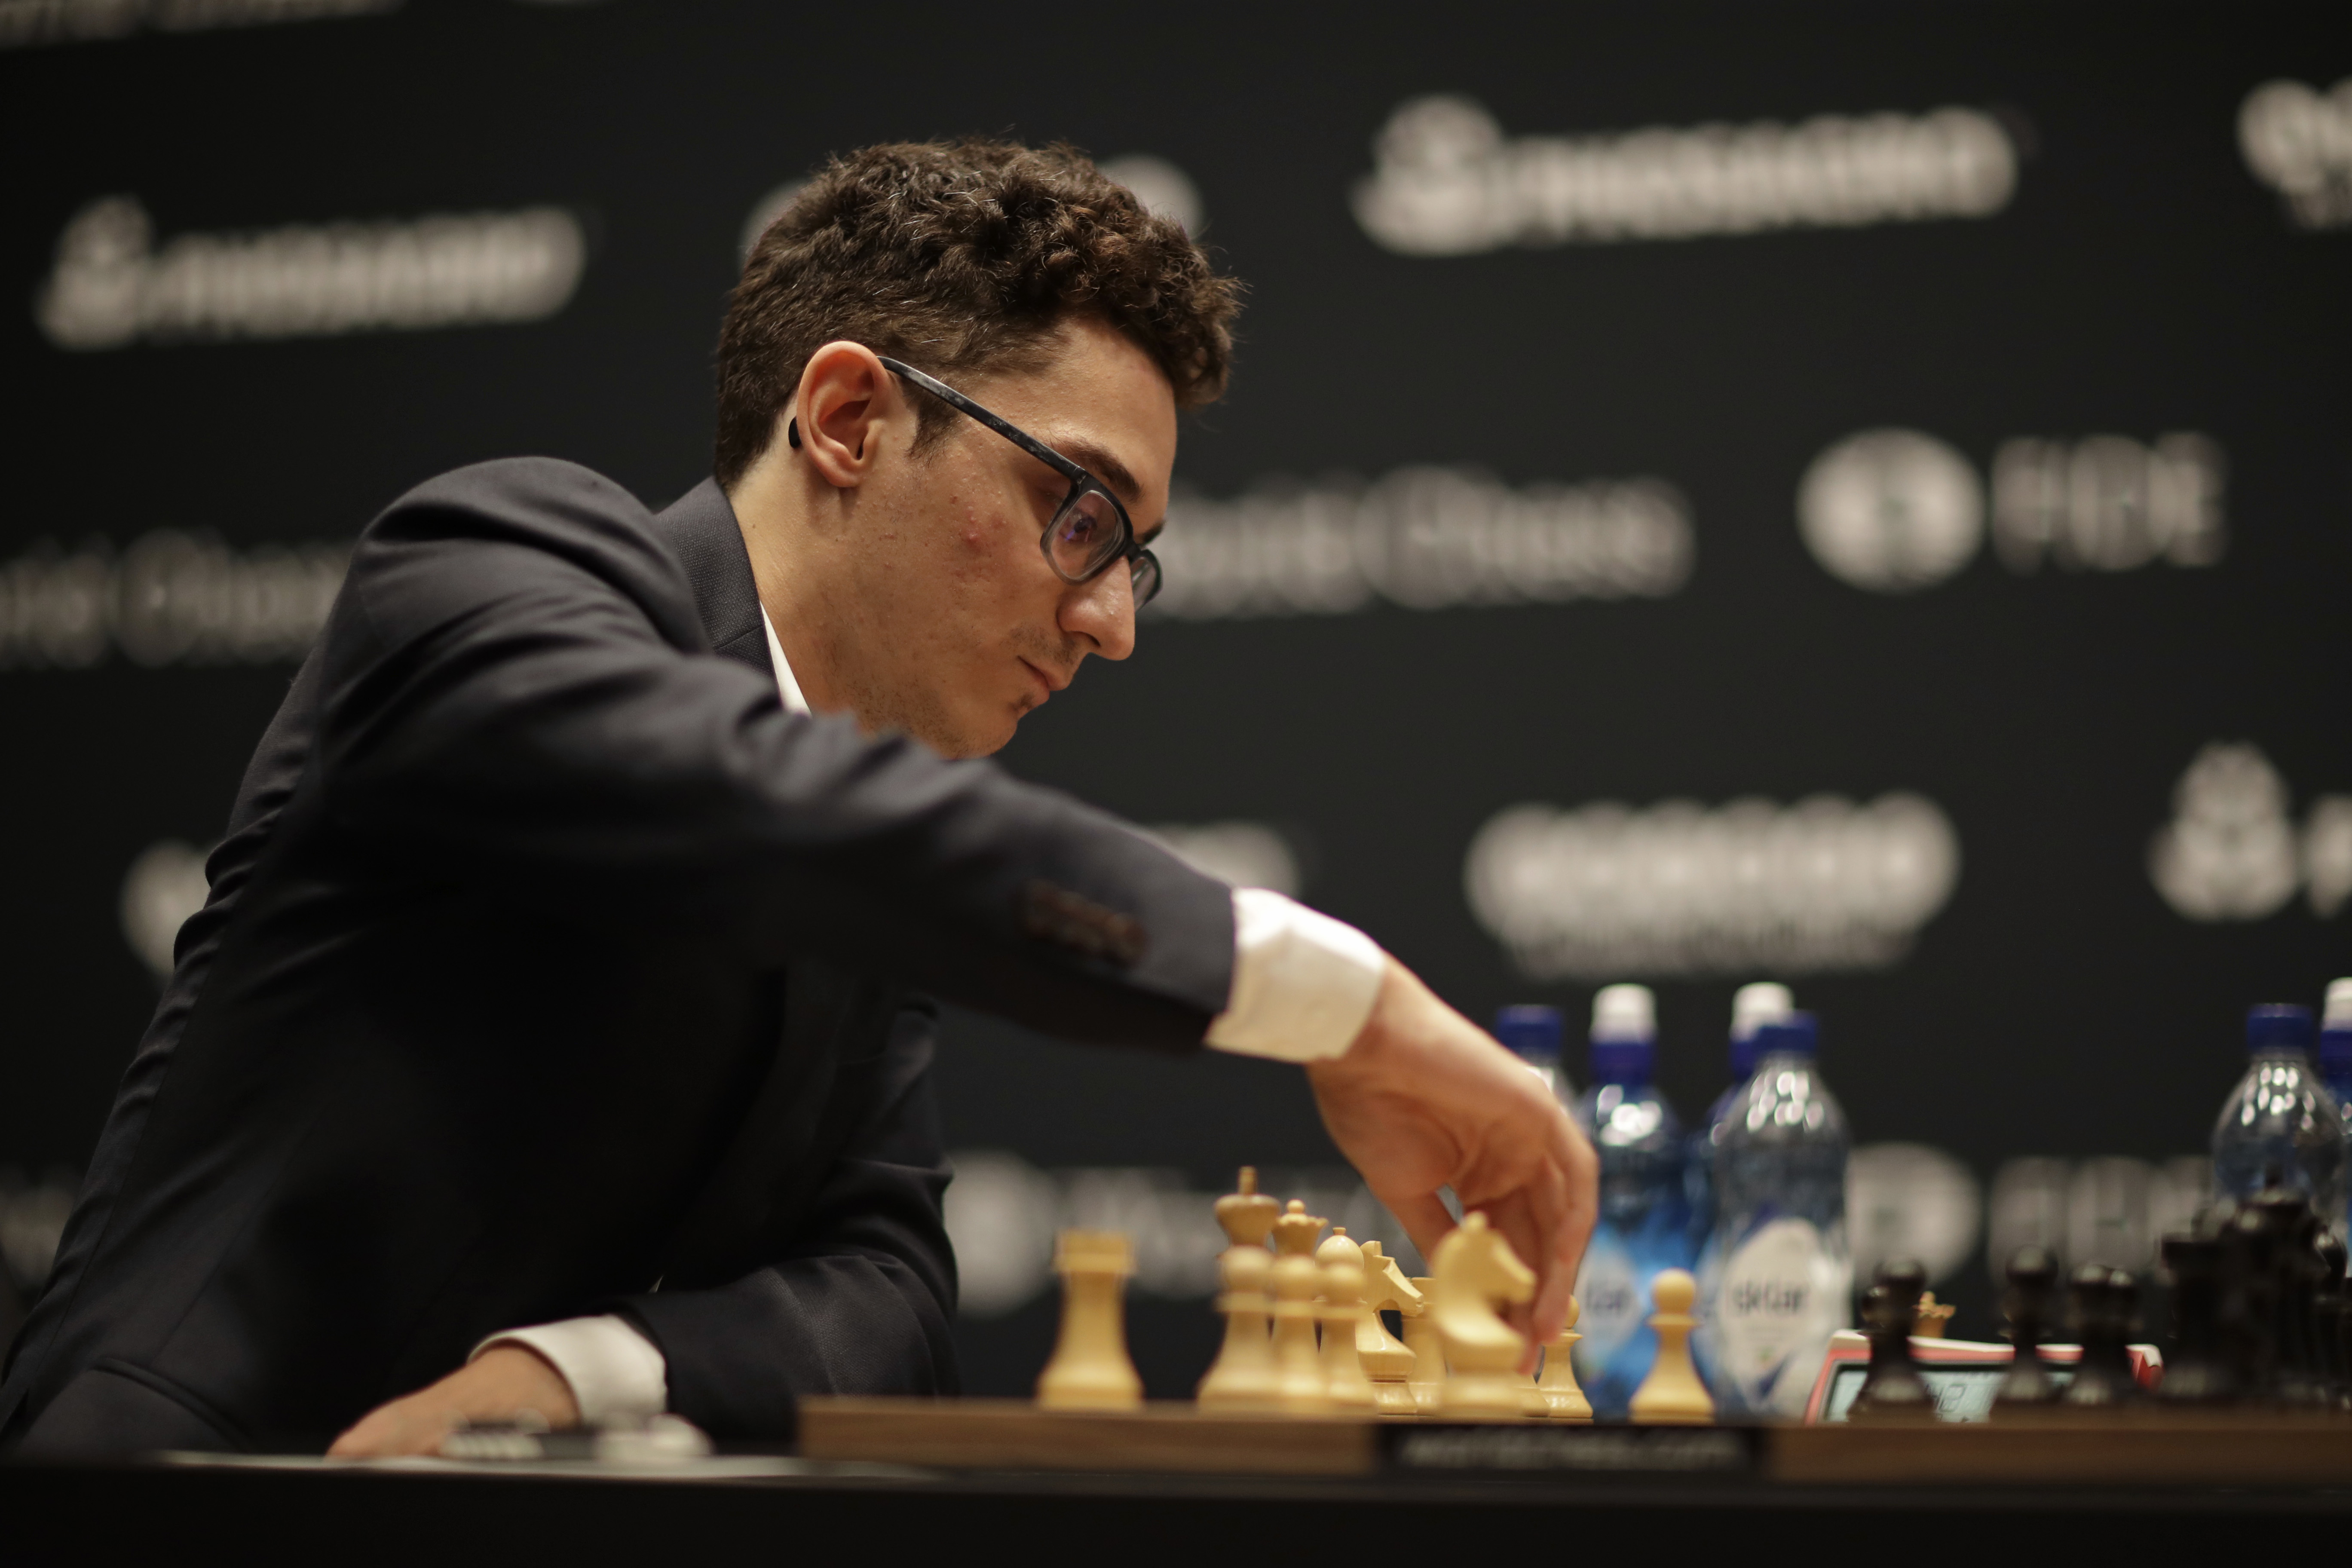 American Fabiano Caruana to play for world chess title after candidates win, World Chess Championship 2018